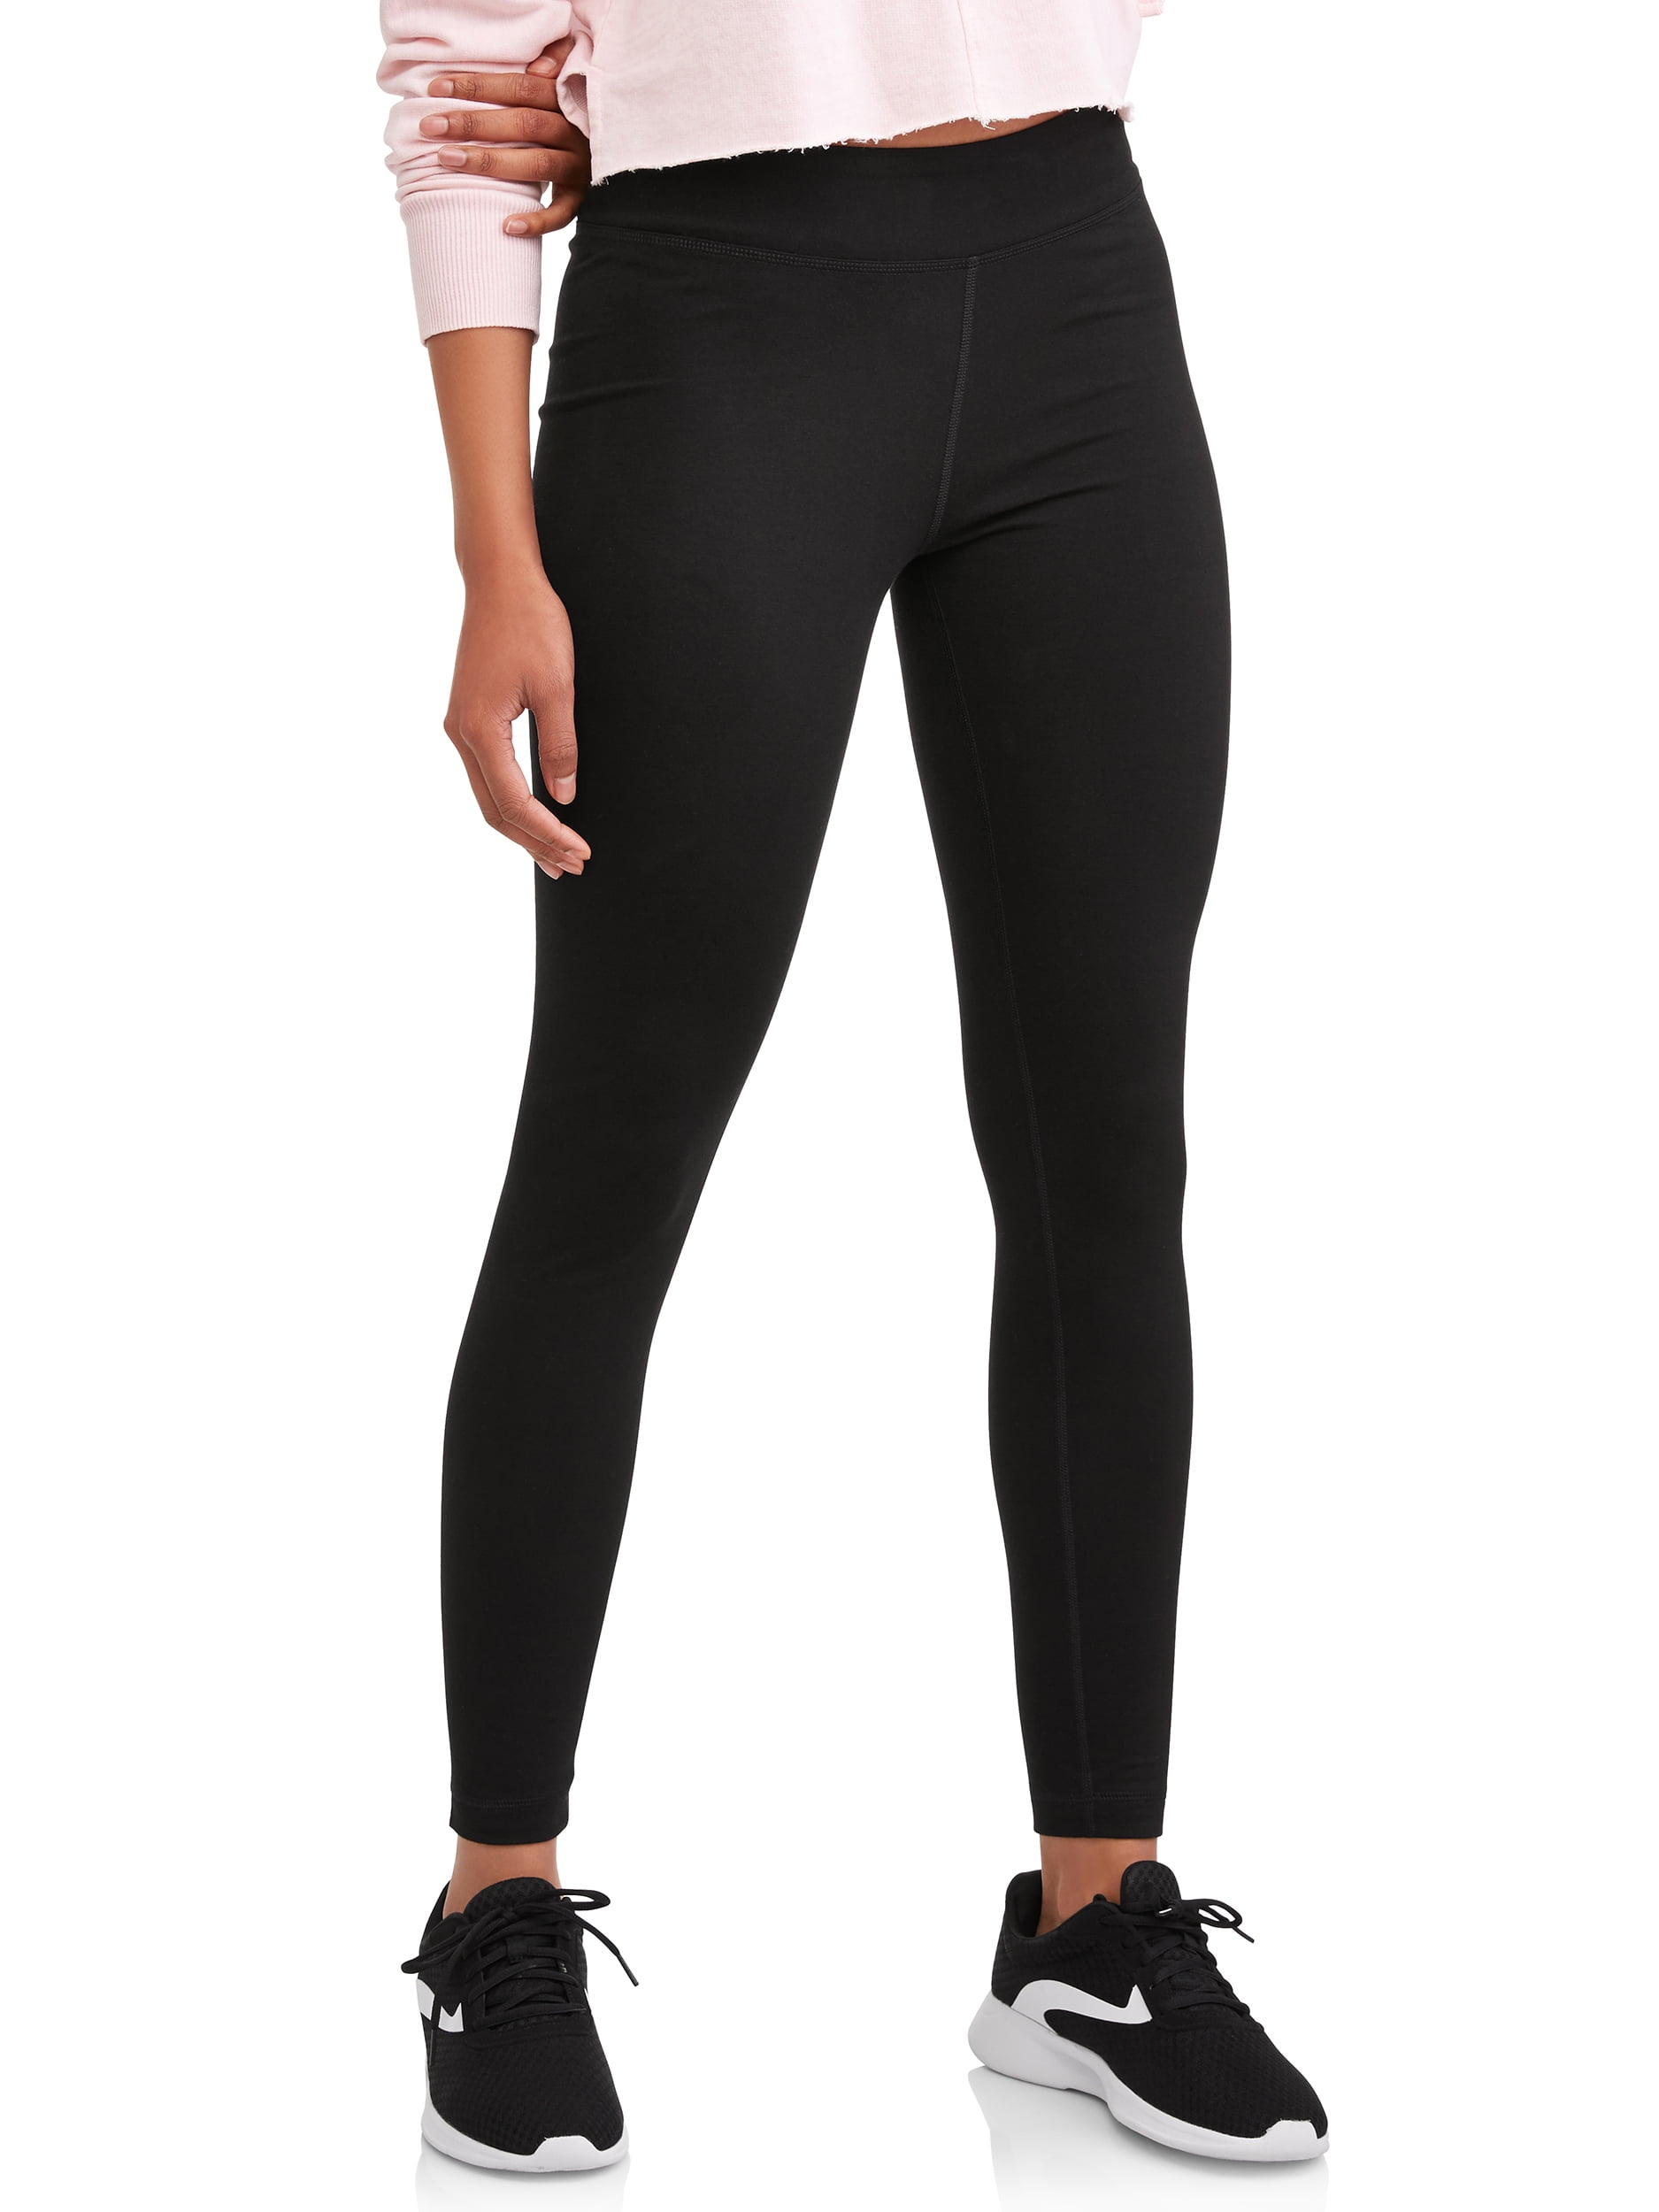 Athletic Works Women's Relaxed Fit Dri-More Core Cotton Blend Yoga Pants Availab